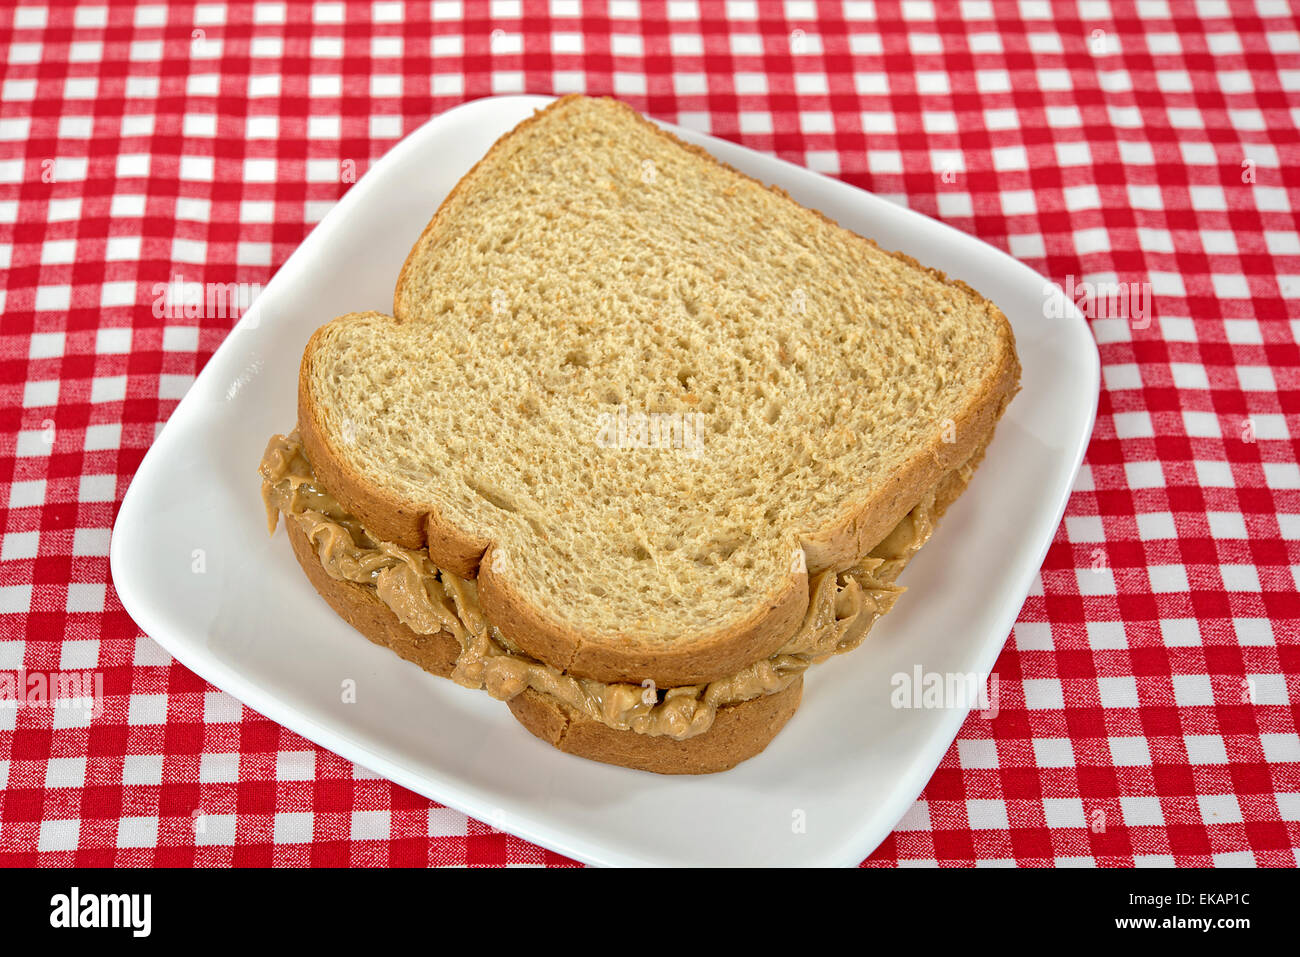 Peanut butter sandwich on whole wheat bread on a square white plate. Stock Photo